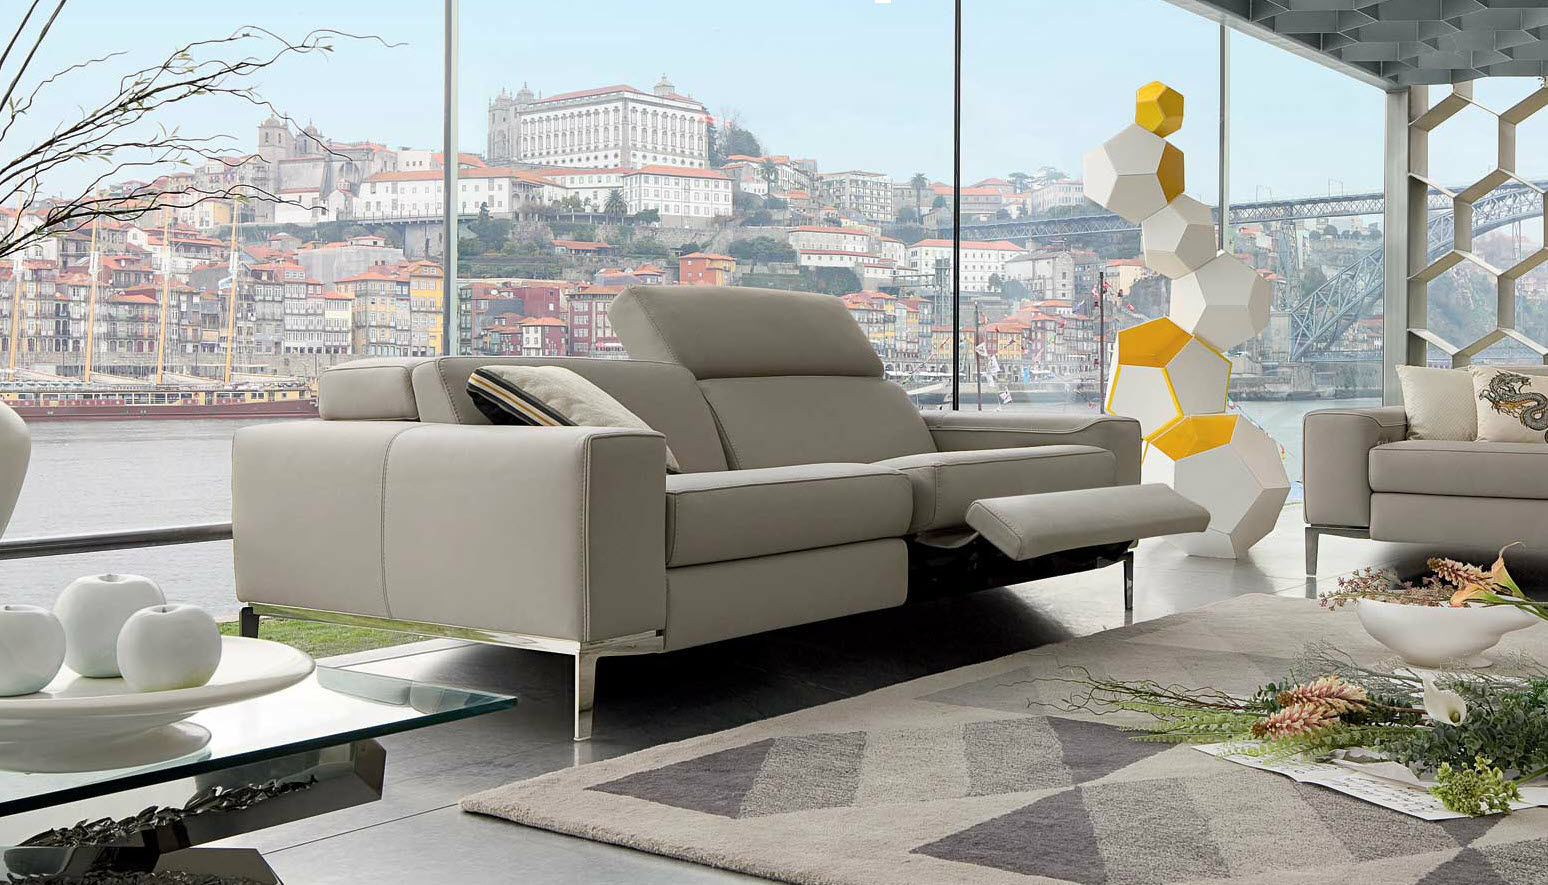 Contemporary Reclining With Wonderful Contemporary Reclining Sofa Furniture With Grey Color Design And Glass Wall Decoration Ideas For Inspiration Decoration 16 Small Living Room With Reclining Sofas To Fit Your Home Decor